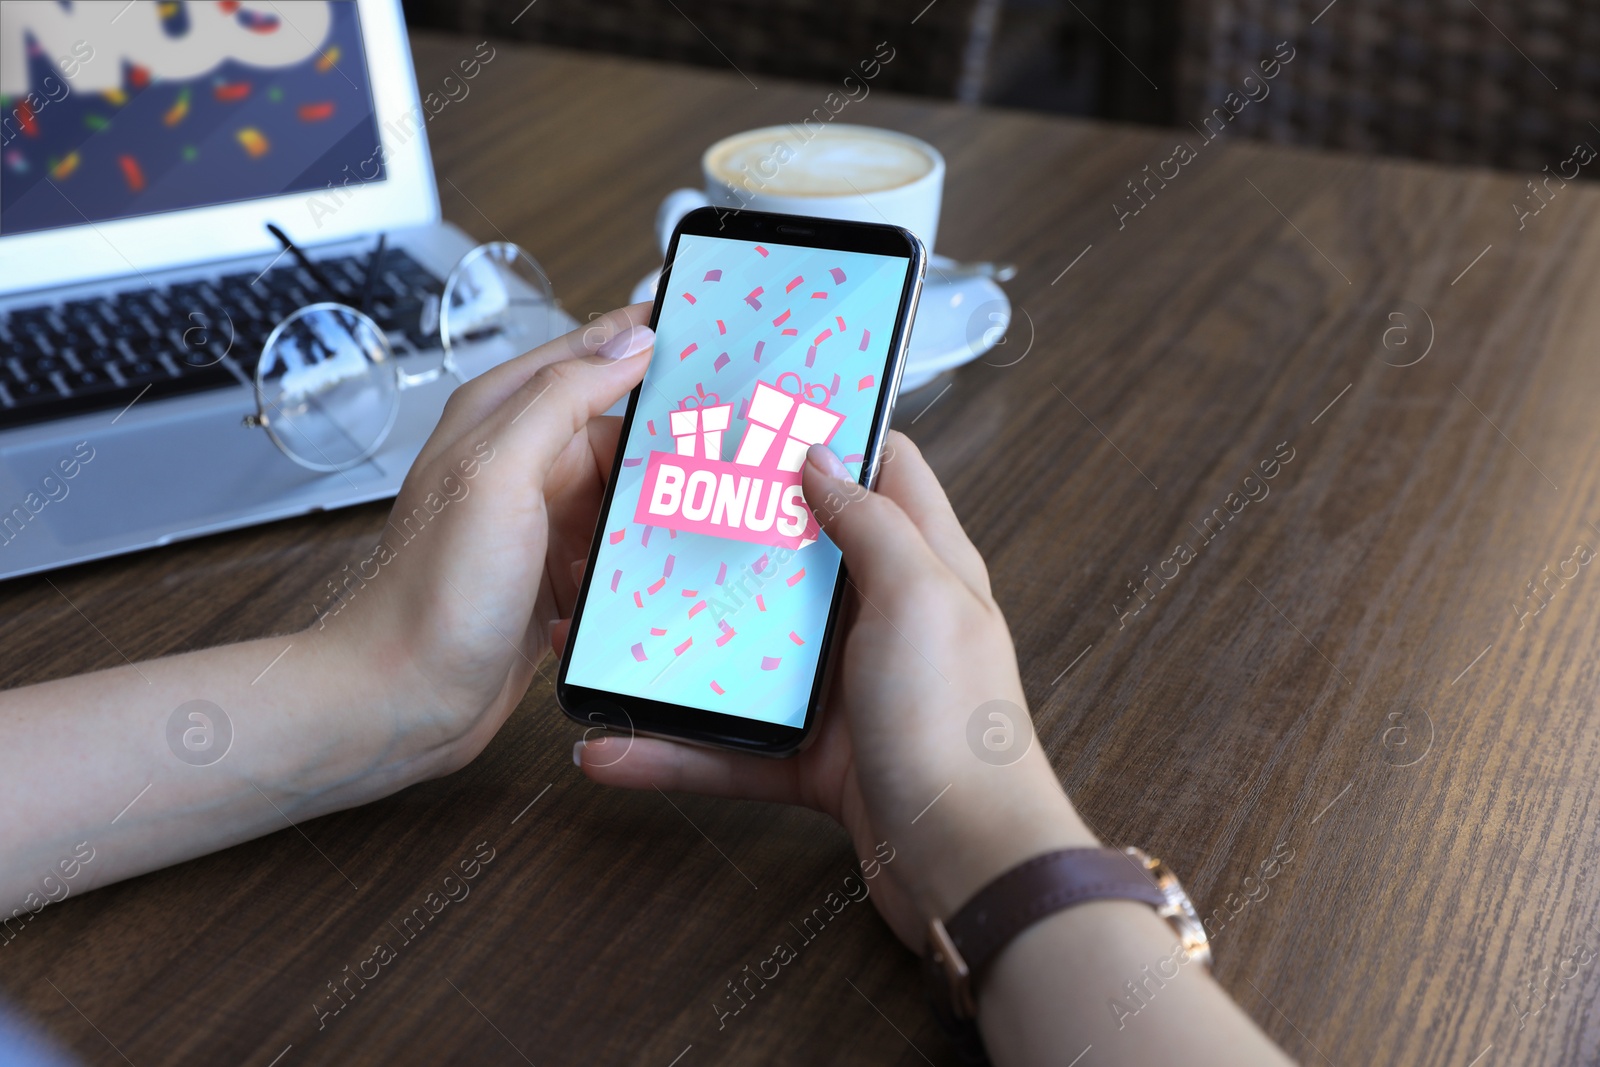 Image of Bonus gaining. Woman using smartphone at wooden table, closeup. Illustration of open gift boxes, word and falling confetti on device screen